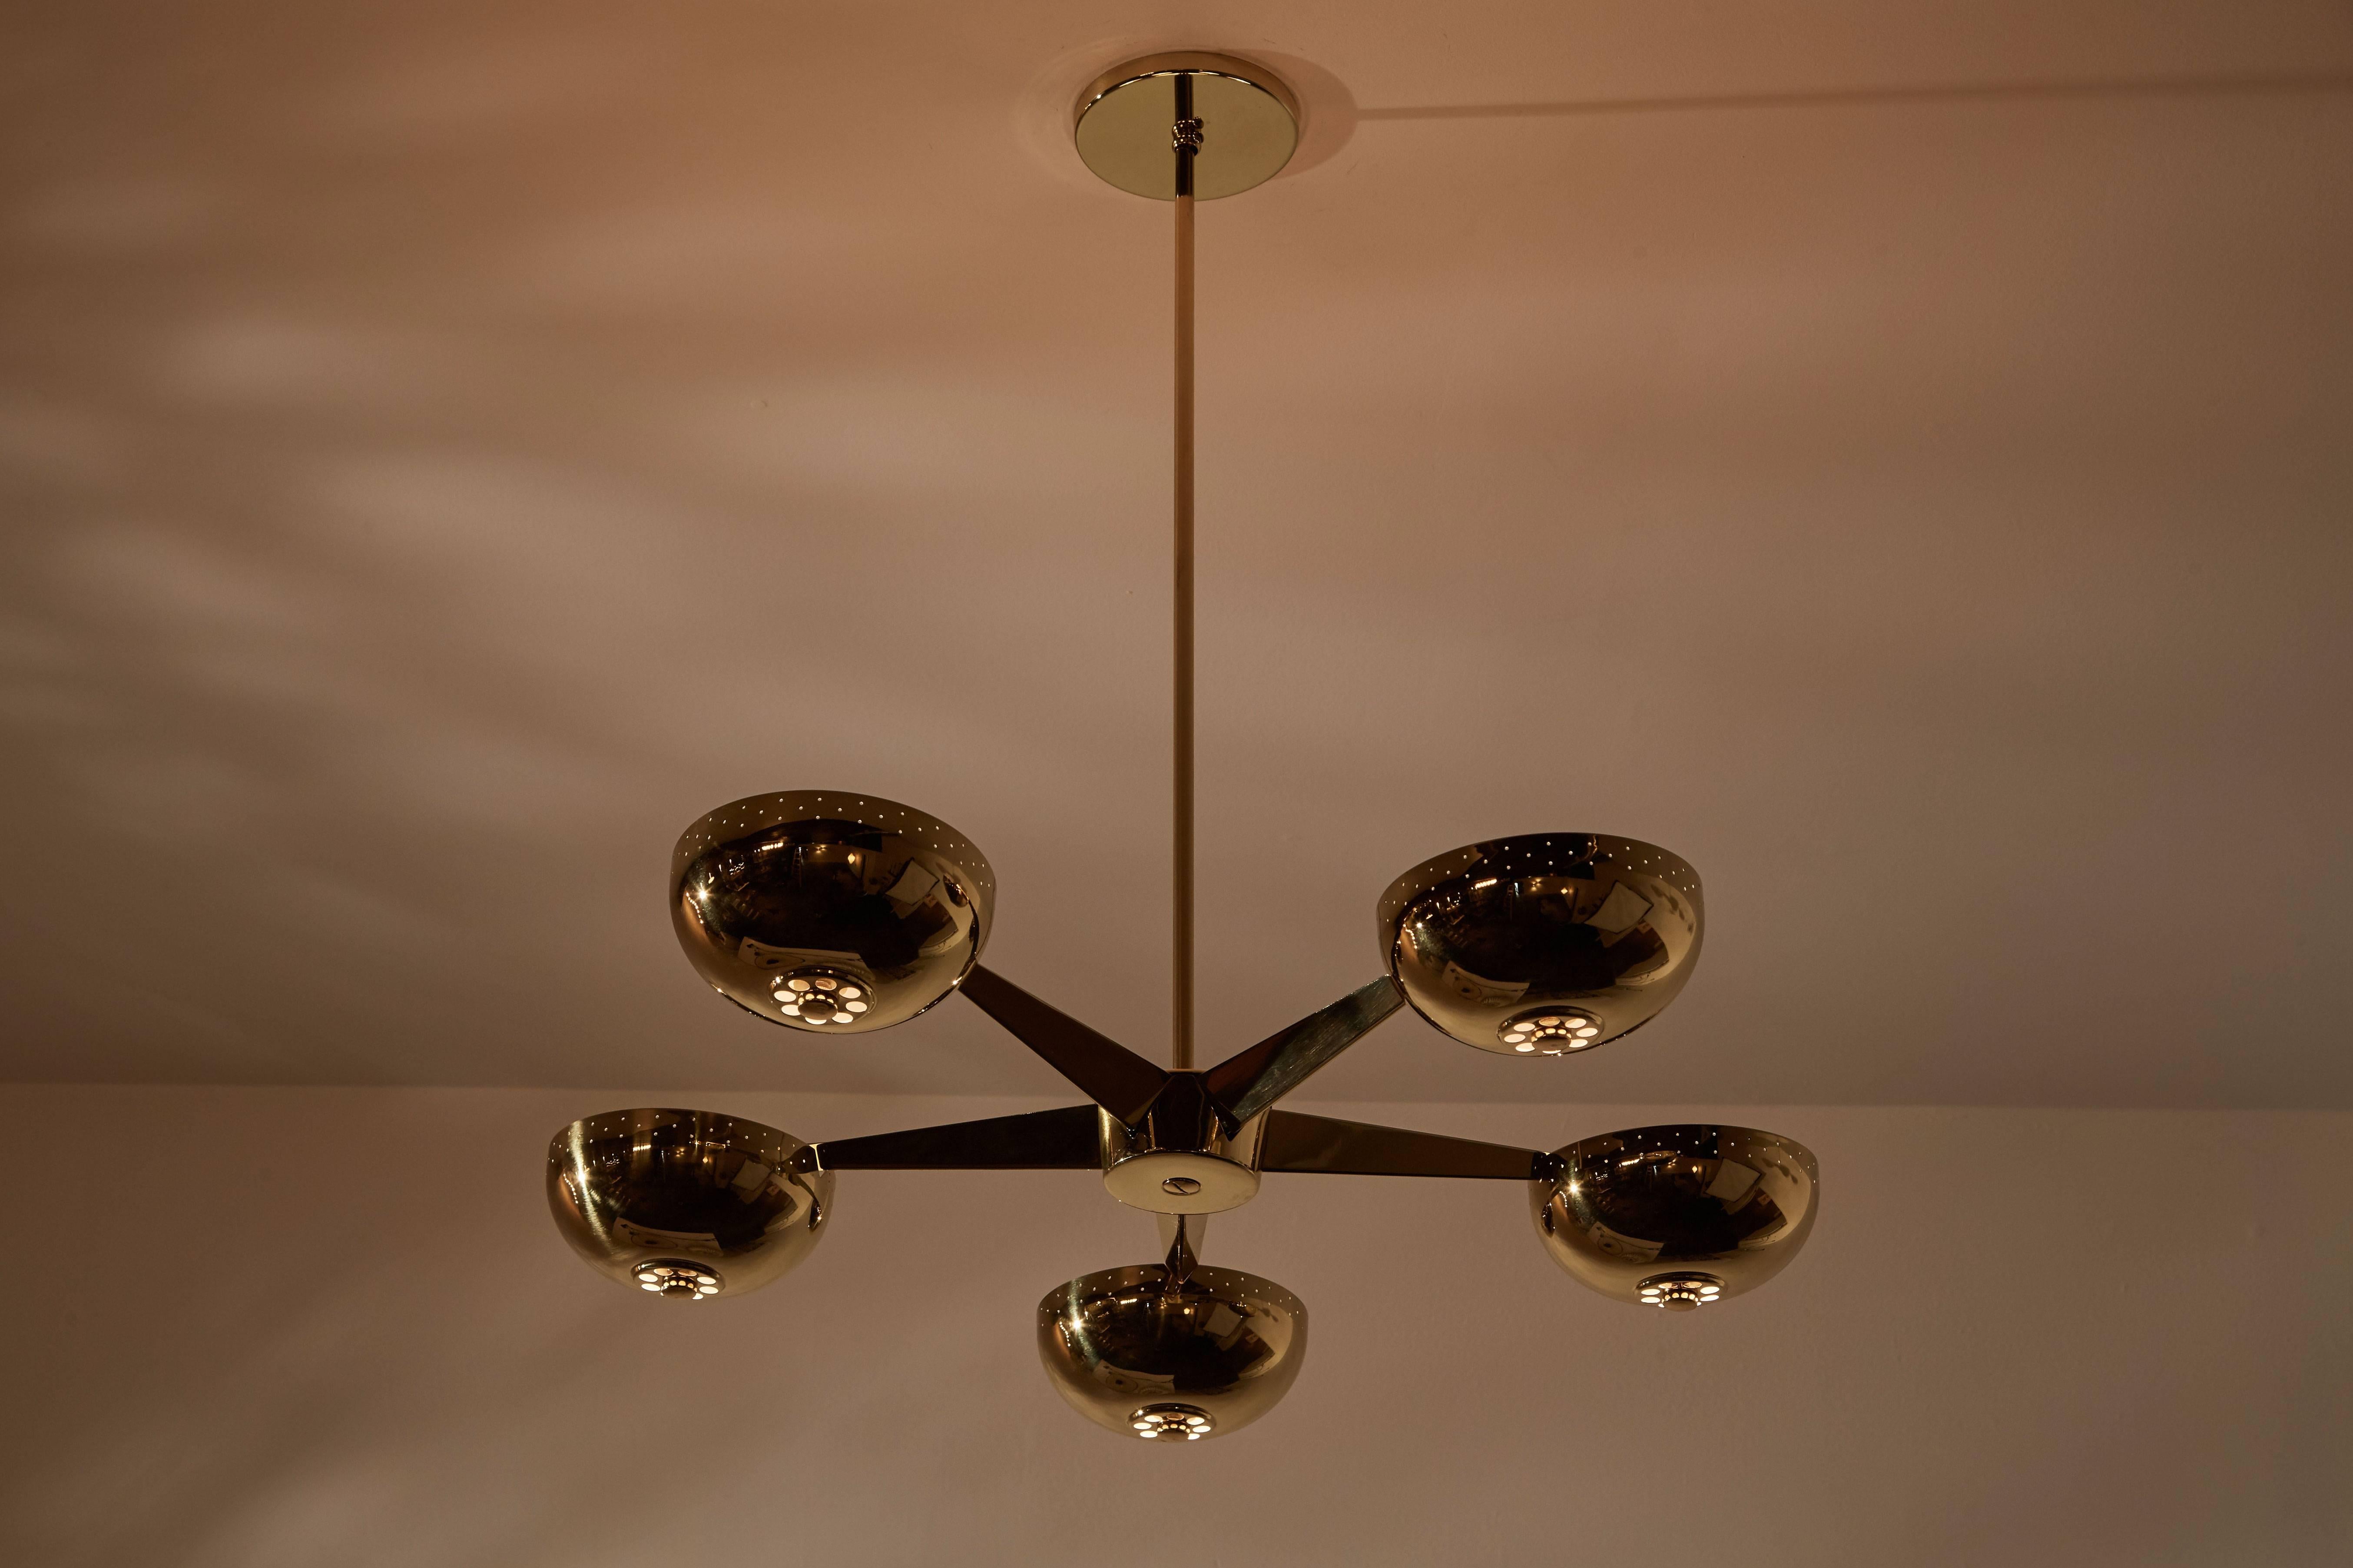 Five-arm brass-plated chandelier in the style of Lightolier in the US, circa 1950s. Perforations to shades. Maintains original manufacturers label. Rewired. Provides uplight. Takes five 100w maximum E26 bulbs.